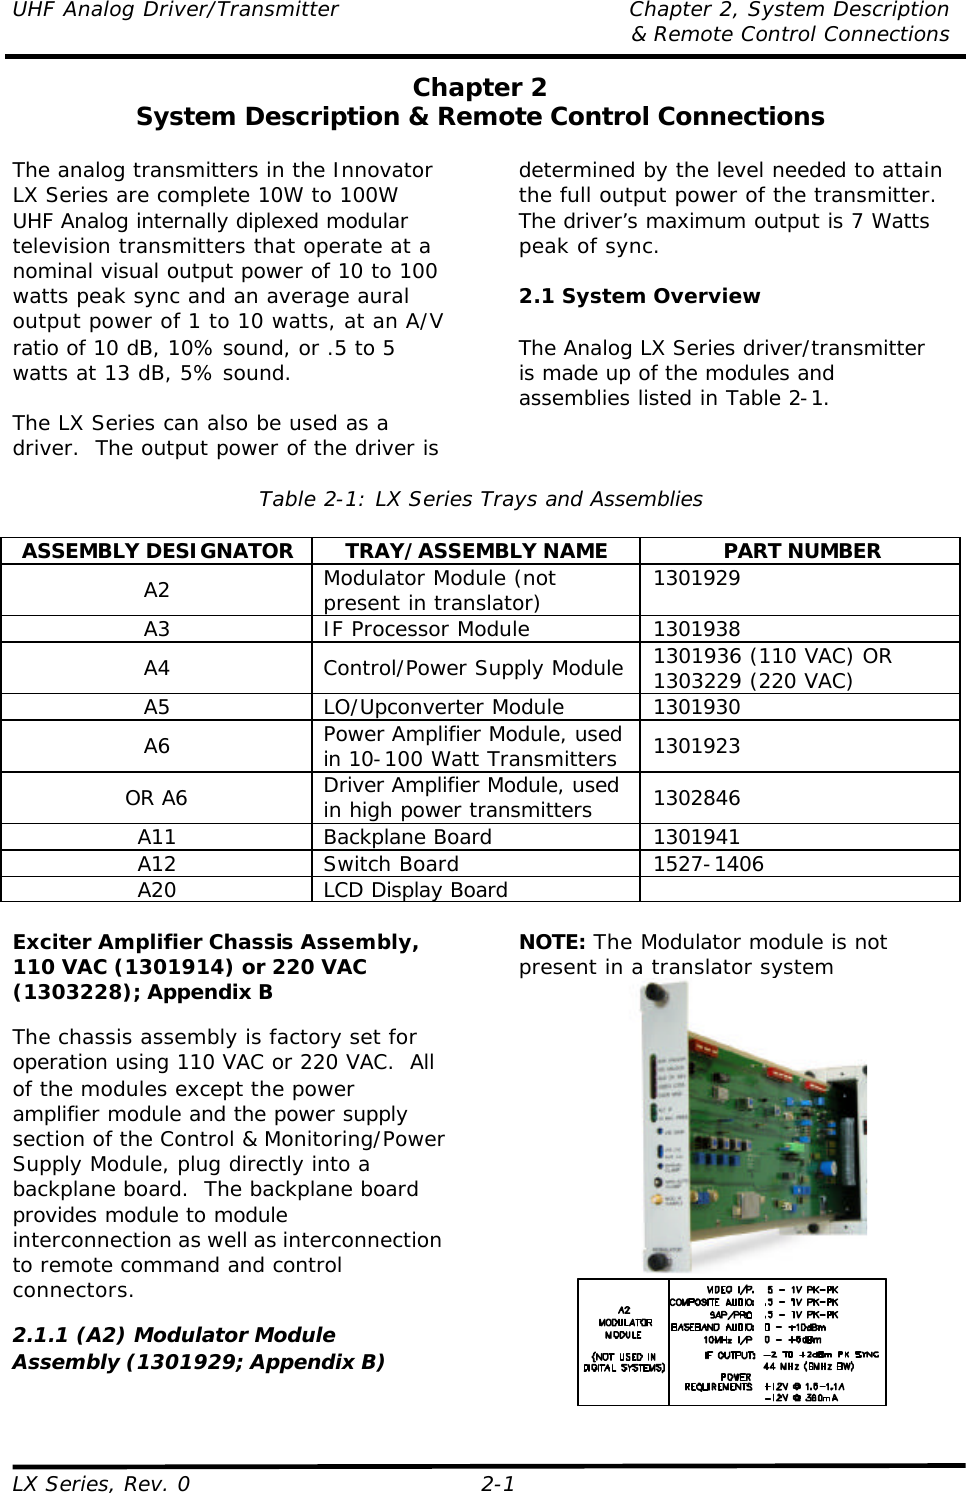 UHF Analog Driver/Transmitter Chapter 2, System Description  &amp; Remote Control Connections LX Series, Rev. 0 2-1 Chapter 2 System Description &amp; Remote Control Connections  The analog transmitters in the Innovator LX Series are complete 10W to 100W UHF Analog internally diplexed modular television transmitters that operate at a nominal visual output power of 10 to 100 watts peak sync and an average aural output power of 1 to 10 watts, at an A/V ratio of 10 dB, 10% sound, or .5 to 5 watts at 13 dB, 5% sound.  The LX Series can also be used as a driver.  The output power of the driver is determined by the level needed to attain the full output power of the transmitter. The driver’s maximum output is 7 Watts peak of sync.  2.1 System Overview  The Analog LX Series driver/transmitter is made up of the modules and assemblies listed in Table 2-1.  Table 2-1: LX Series Trays and Assemblies  ASSEMBLY DESIGNATOR TRAY/ASSEMBLY NAME PART NUMBER A2 Modulator Module (not present in translator) 1301929 A3 IF Processor Module 1301938 A4 Control/Power Supply Module 1301936 (110 VAC) OR 1303229 (220 VAC) A5 LO/Upconverter Module 1301930 A6 Power Amplifier Module, used in 10-100 Watt Transmitters 1301923 OR A6 Driver Amplifier Module, used in high power transmitters 1302846 A11 Backplane Board 1301941 A12 Switch Board 1527-1406 A20 LCD Display Board    Exciter Amplifier Chassis Assembly, 110 VAC (1301914) or 220 VAC (1303228); Appendix B  The chassis assembly is factory set for operation using 110 VAC or 220 VAC.  All of the modules except the power amplifier module and the power supply section of the Control &amp; Monitoring/Power Supply Module, plug directly into a backplane board.  The backplane board provides module to module interconnection as well as interconnection to remote command and control connectors.  2.1.1 (A2) Modulator Module Assembly (1301929; Appendix B)  NOTE: The Modulator module is not present in a translator system   